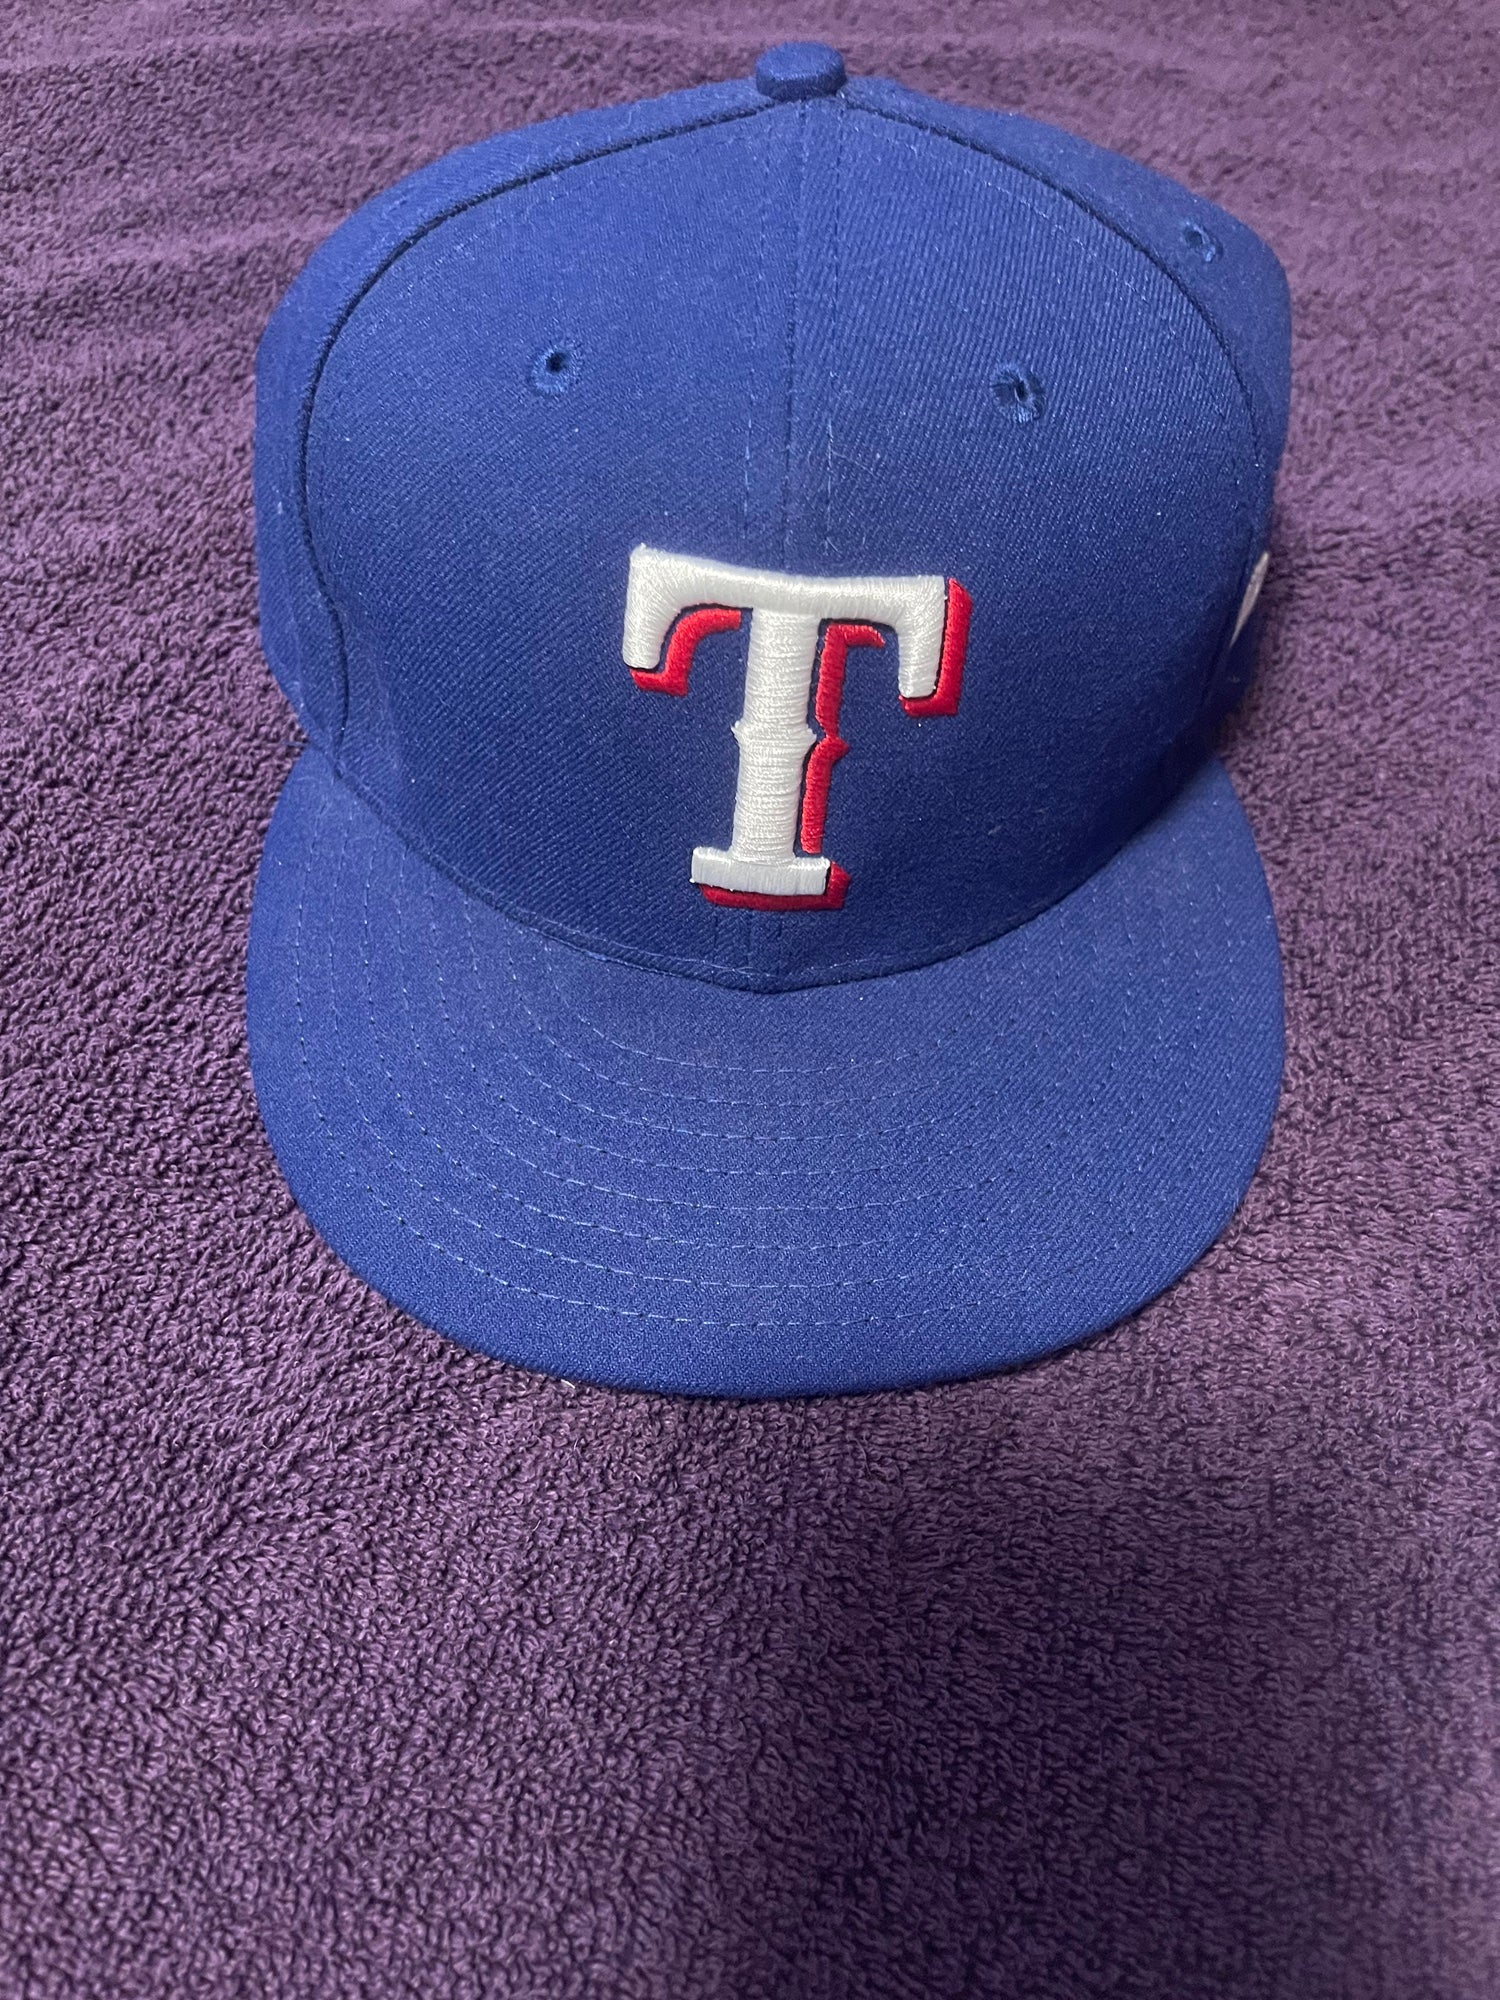 Rangers or Cowboys?! Which one you going with?! ⚾️🏈 #hats #MLB #hatcl